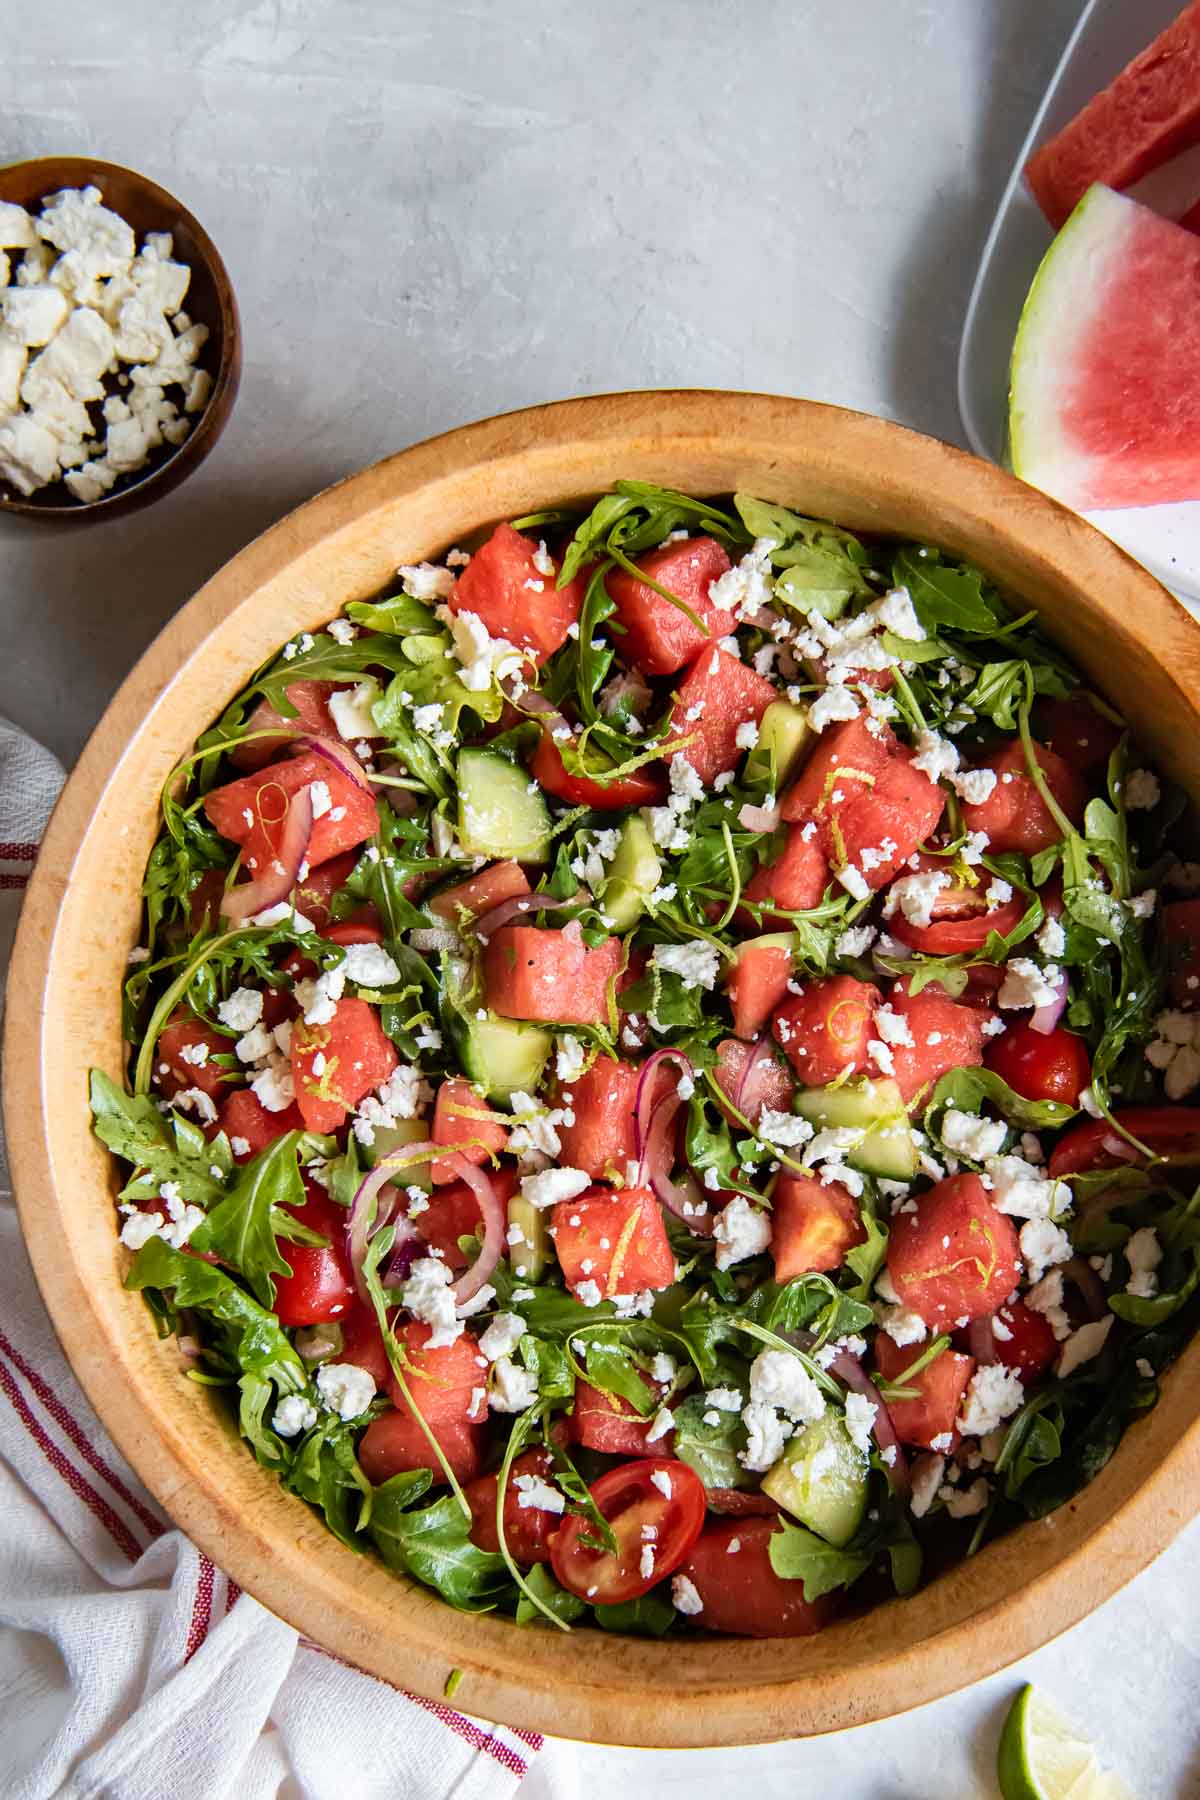 Watermelon salad with arugula and feta in a wood serving bowl.